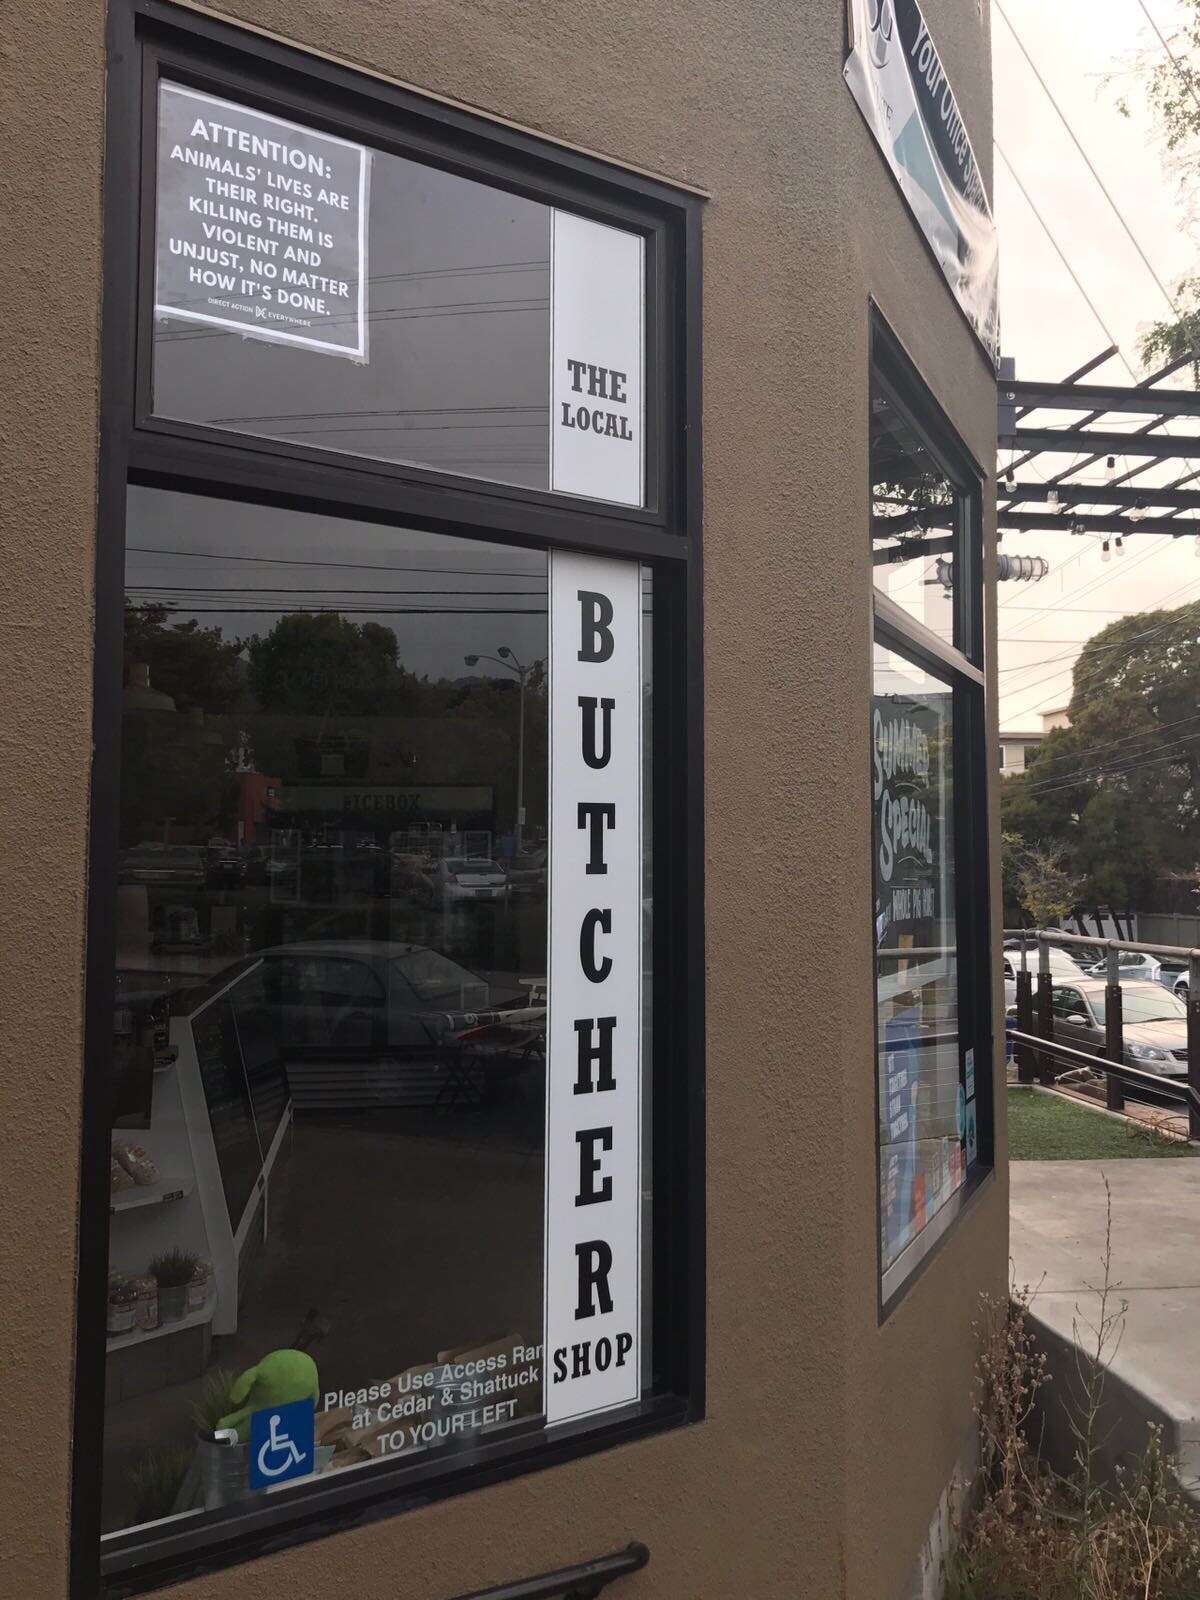 A sign in the window of The Local Butcher Shop in Berkeley reads: "Attention: Animals' lives are their right. Killing them is violent and unjust, no matter how it's done." The store displayed the sign in exchange for the halting of weekly protests outside the shop organized by animal rights group Direct Action Everywhere.